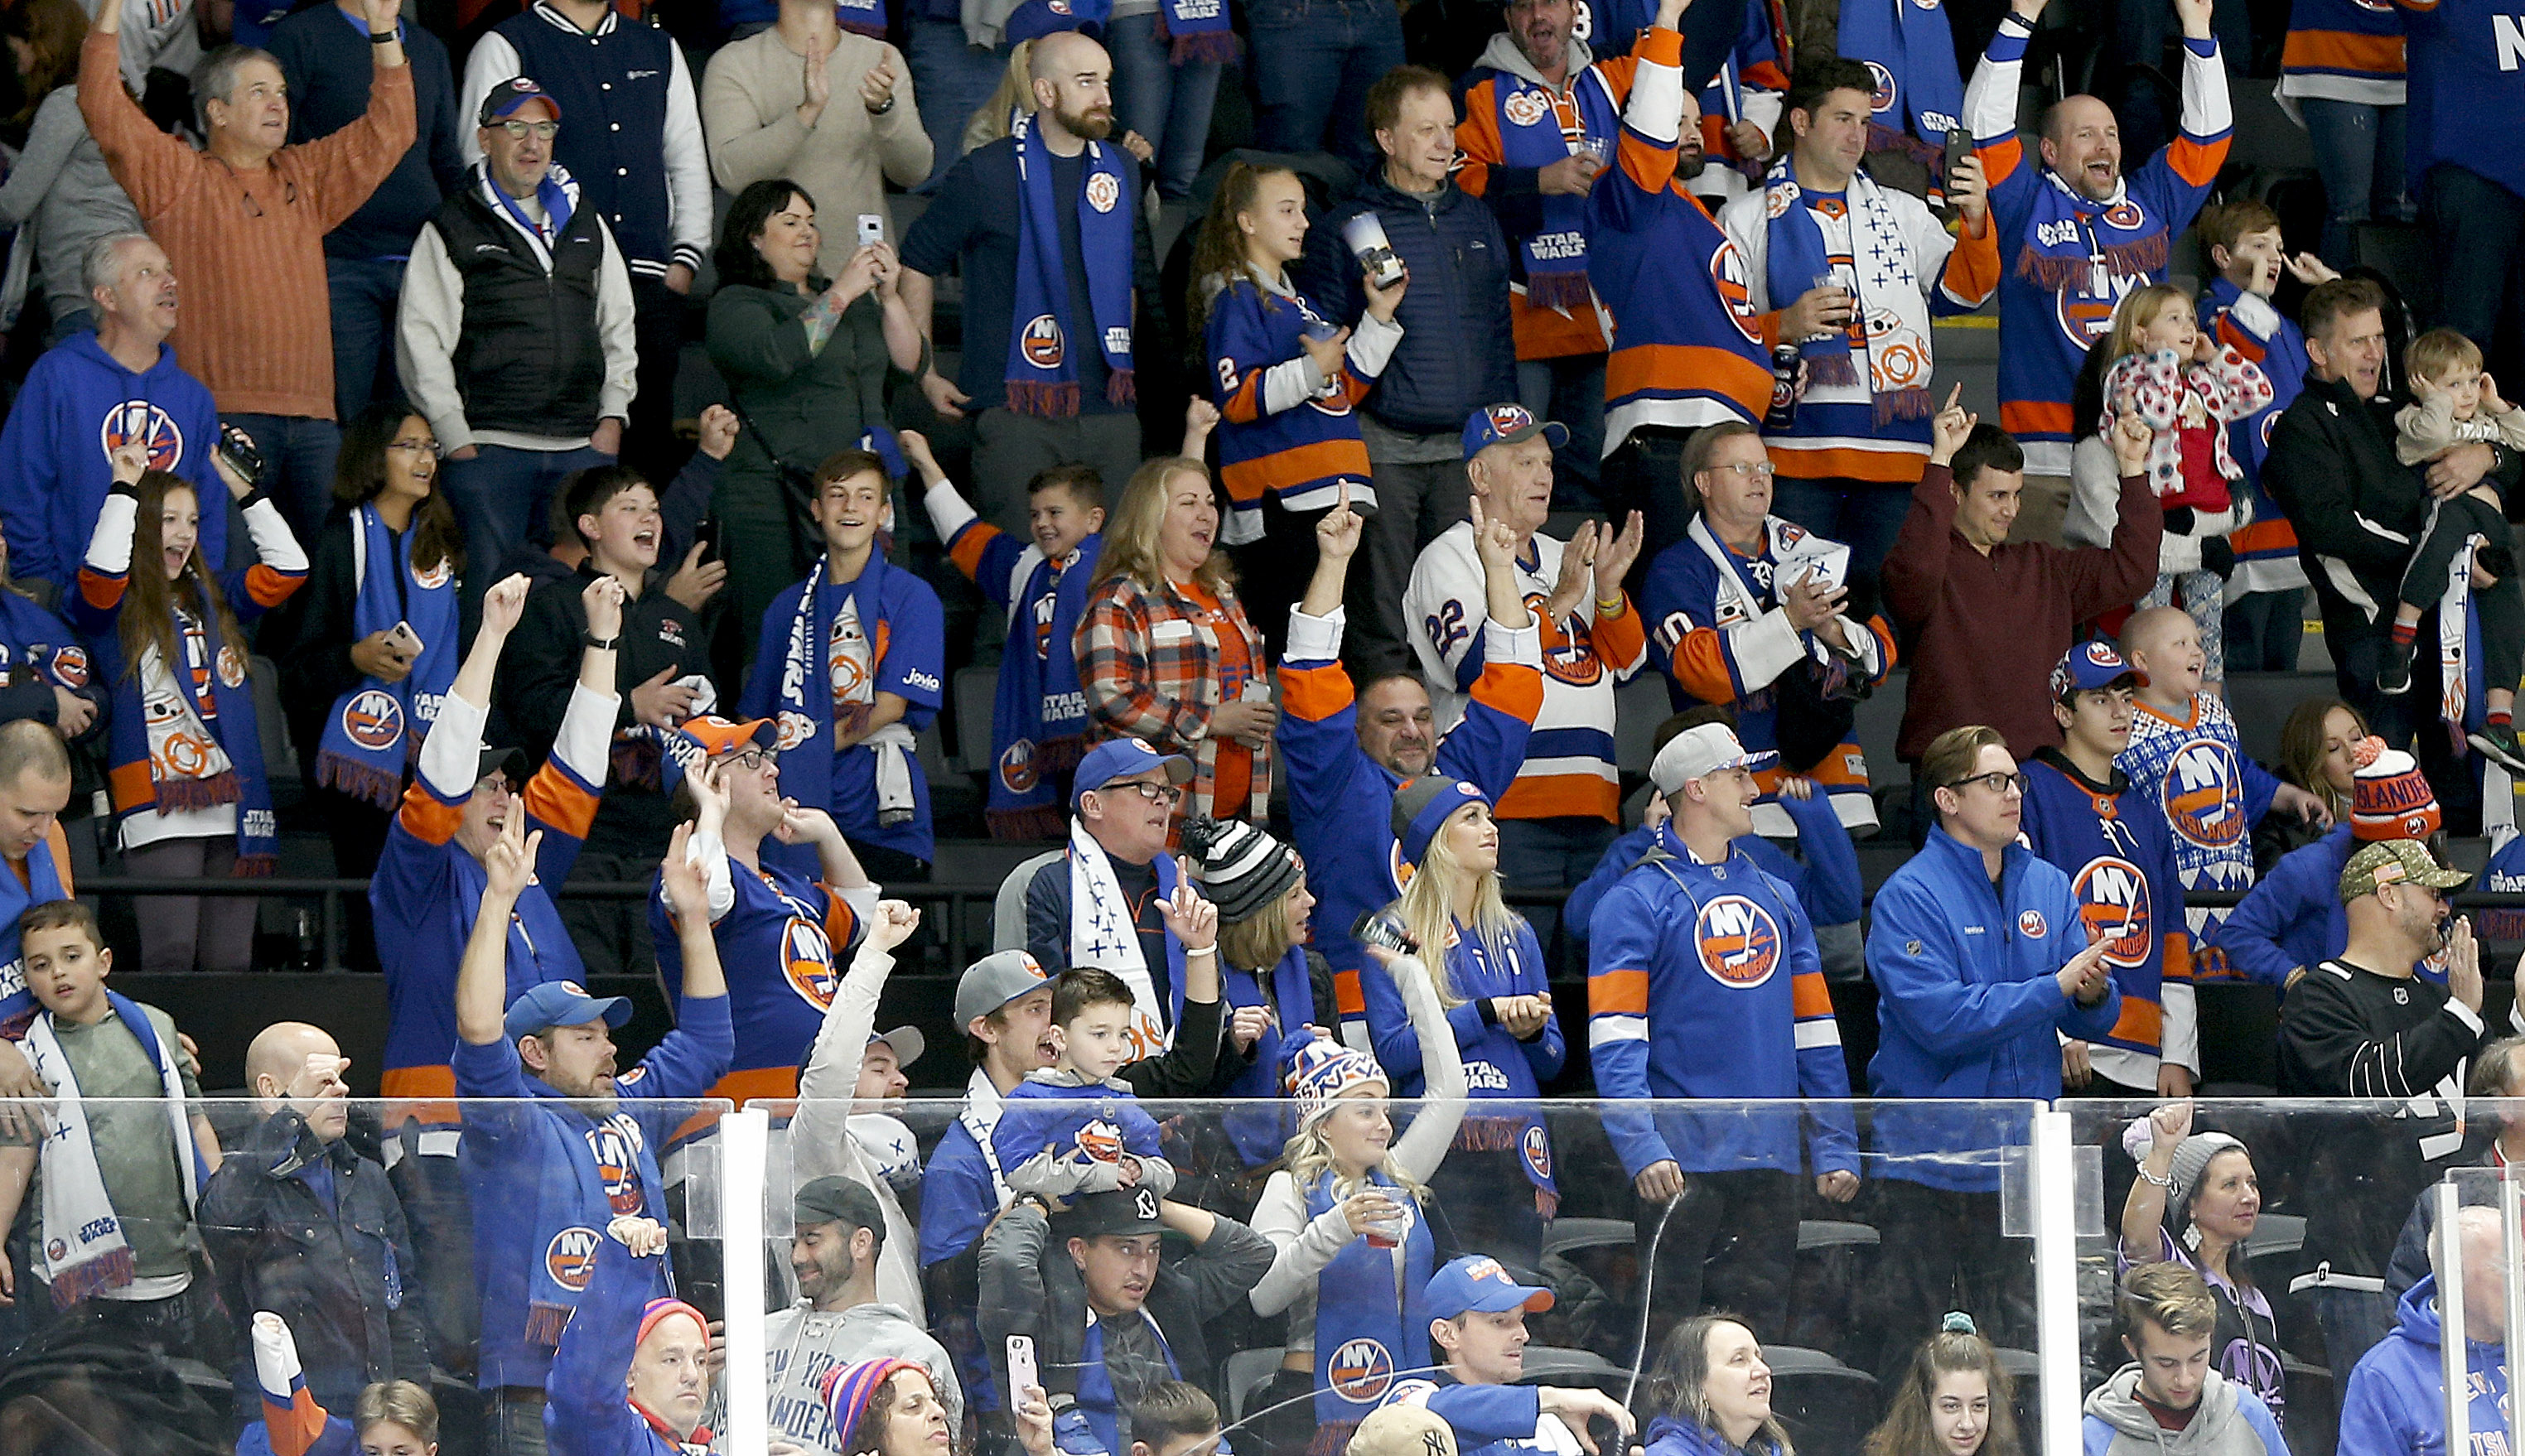 Dec 14, 2019; Uniondale, NY, USA; Islanders fans react after the New York Islanders defeated the Buffalo Sabres at Nassau Veterans Memorial Coliseum. Mandatory Credit: Andy Marlin-USA TODAY Sports